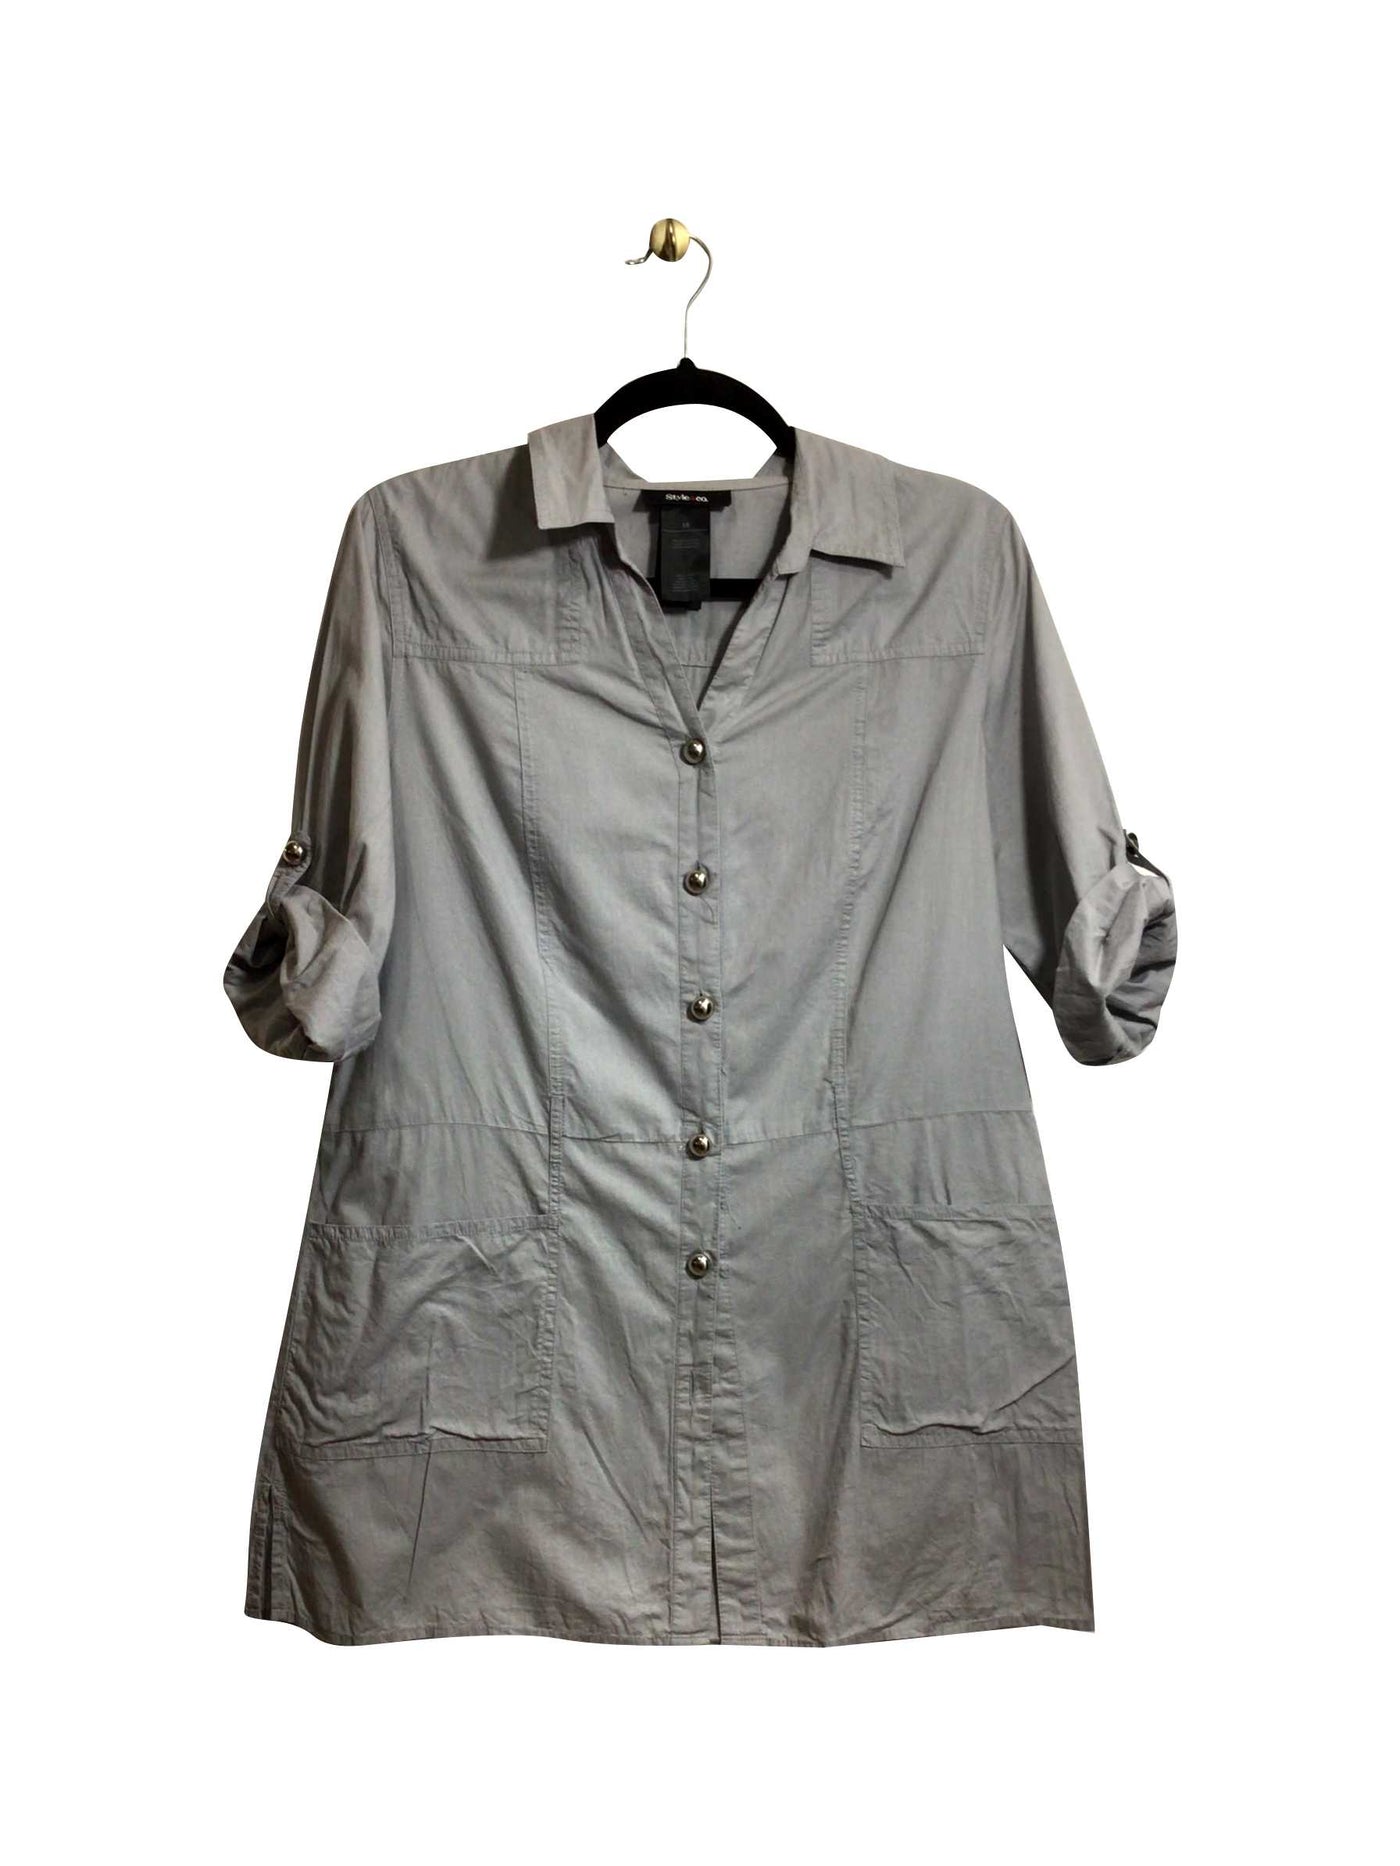 STYLE & CO. Regular fit Button-down Top in Gray - Size 10 | 12.29 $ KOOP